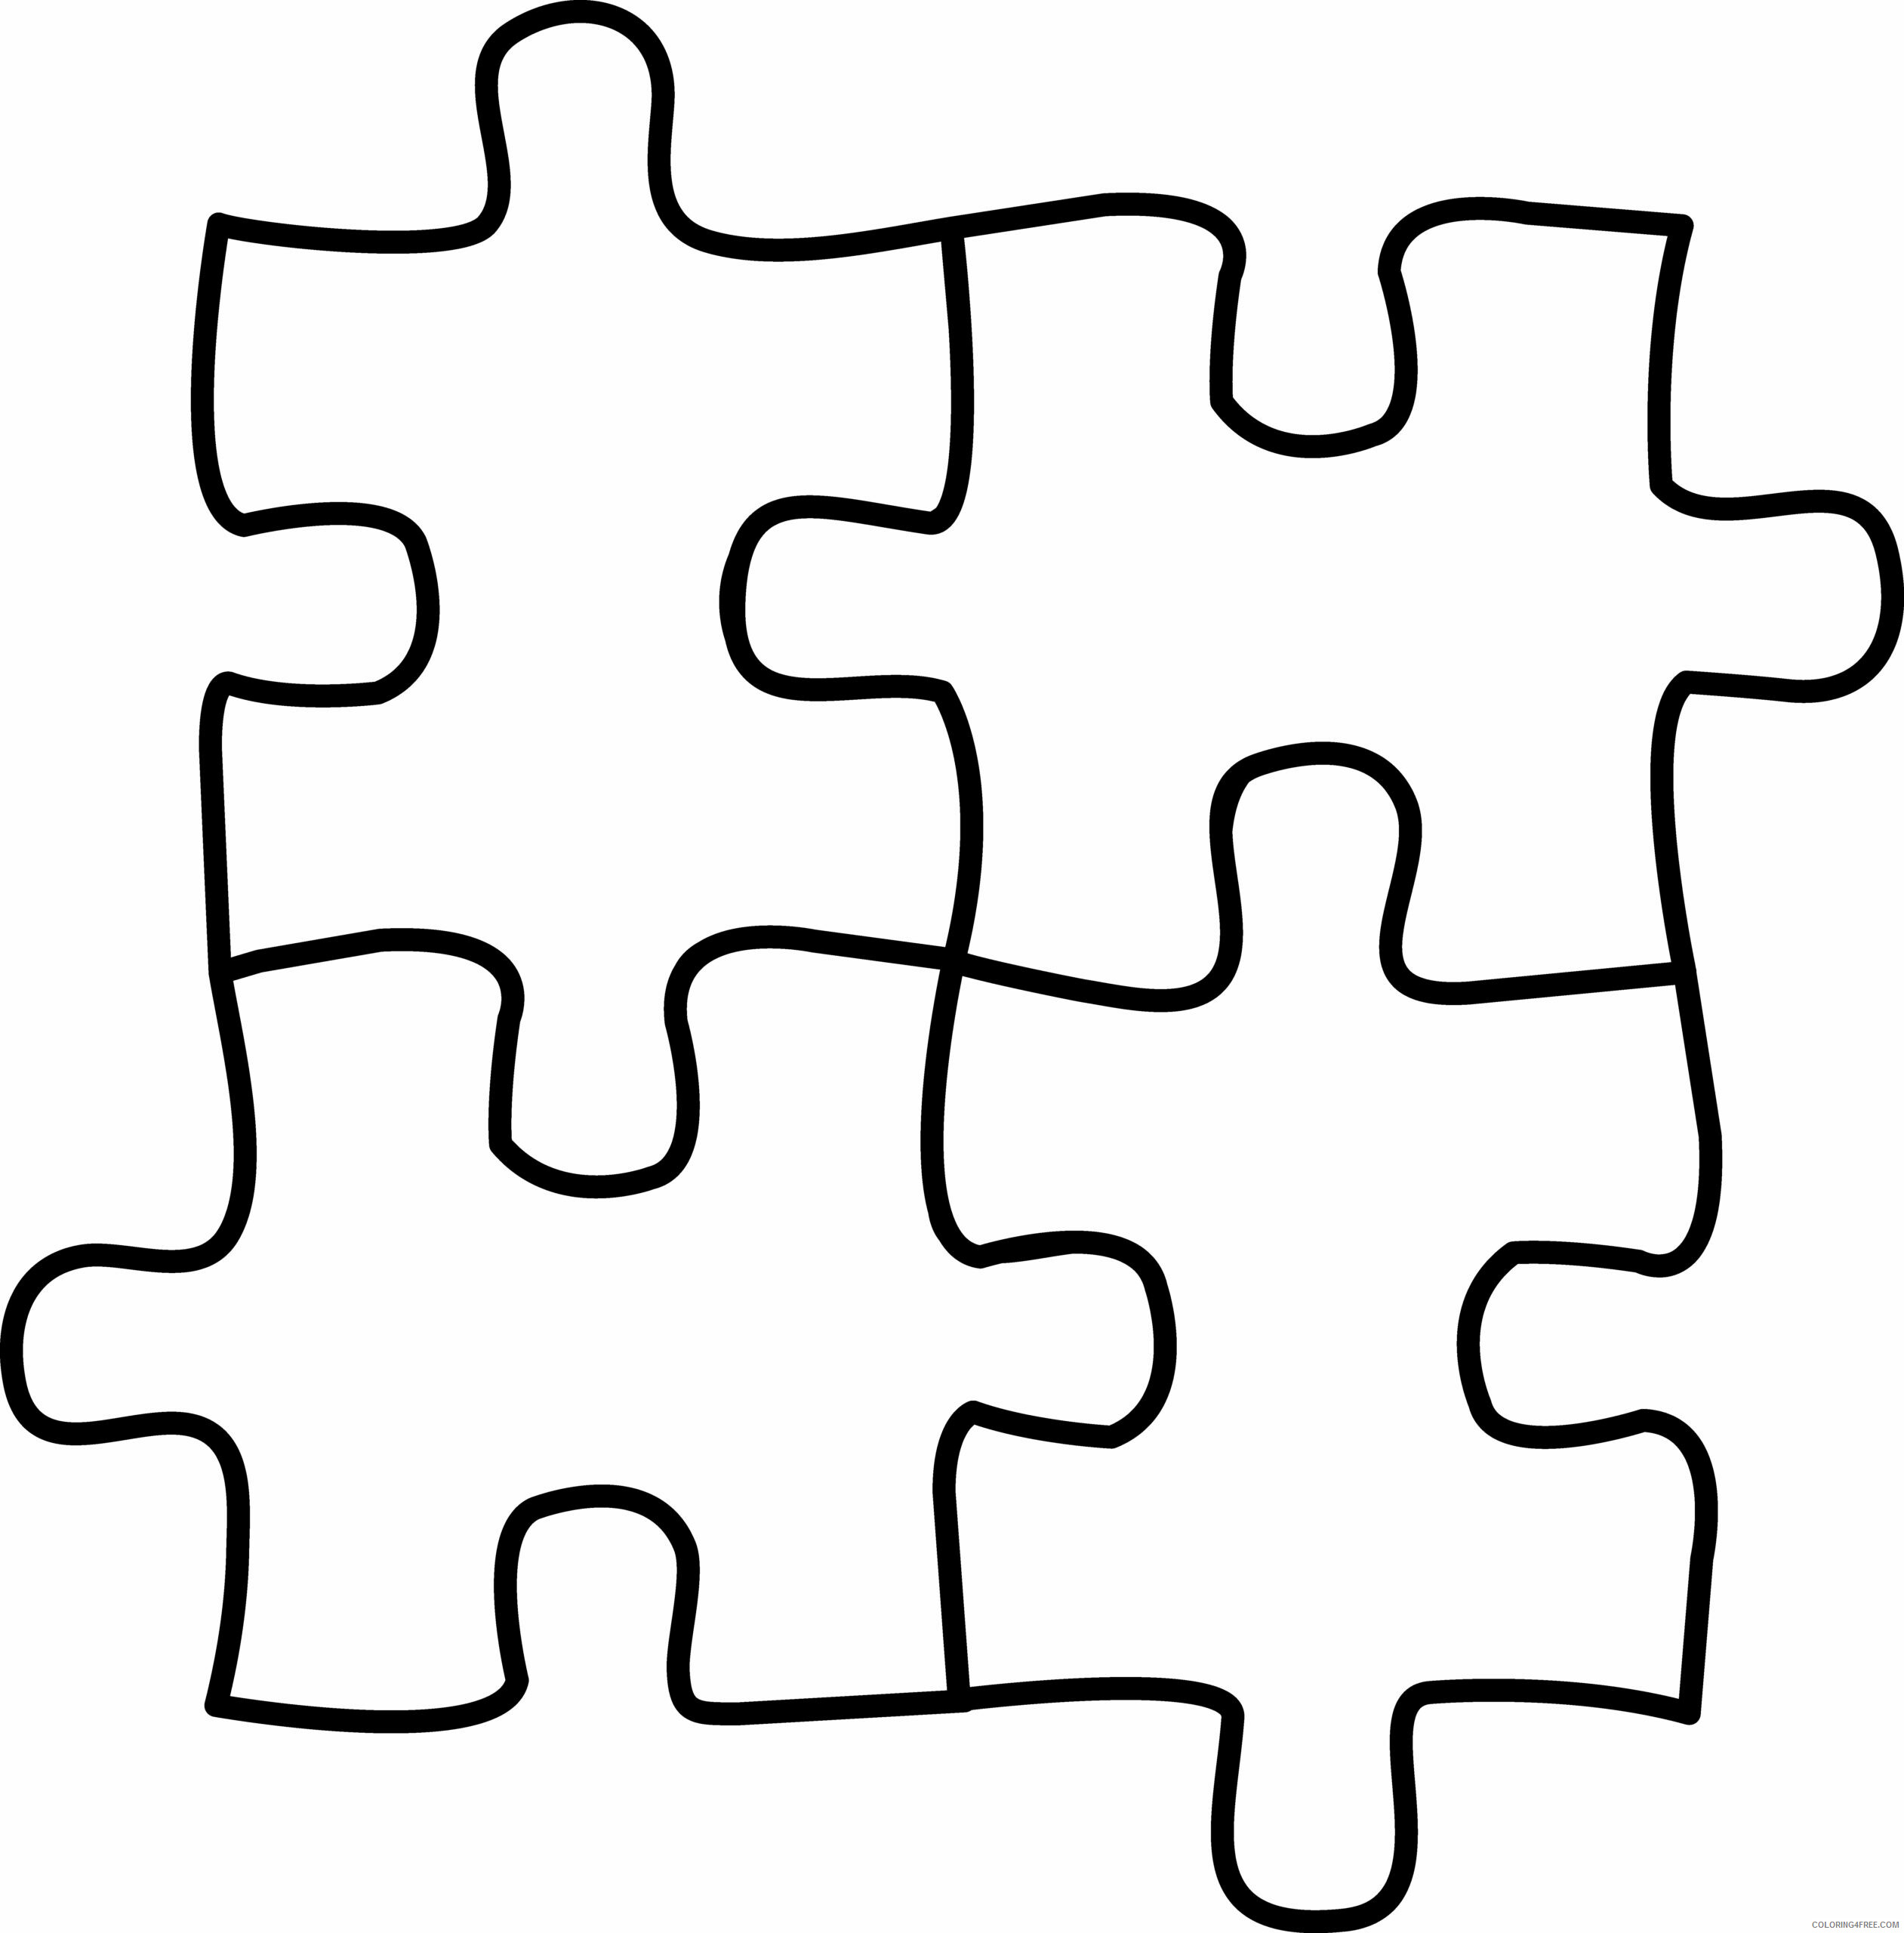 Autism Puzzle Piece Coloring Page Printable Sheets 10 Pics of Puzzle Piece 2021 a 3701 Coloring4free